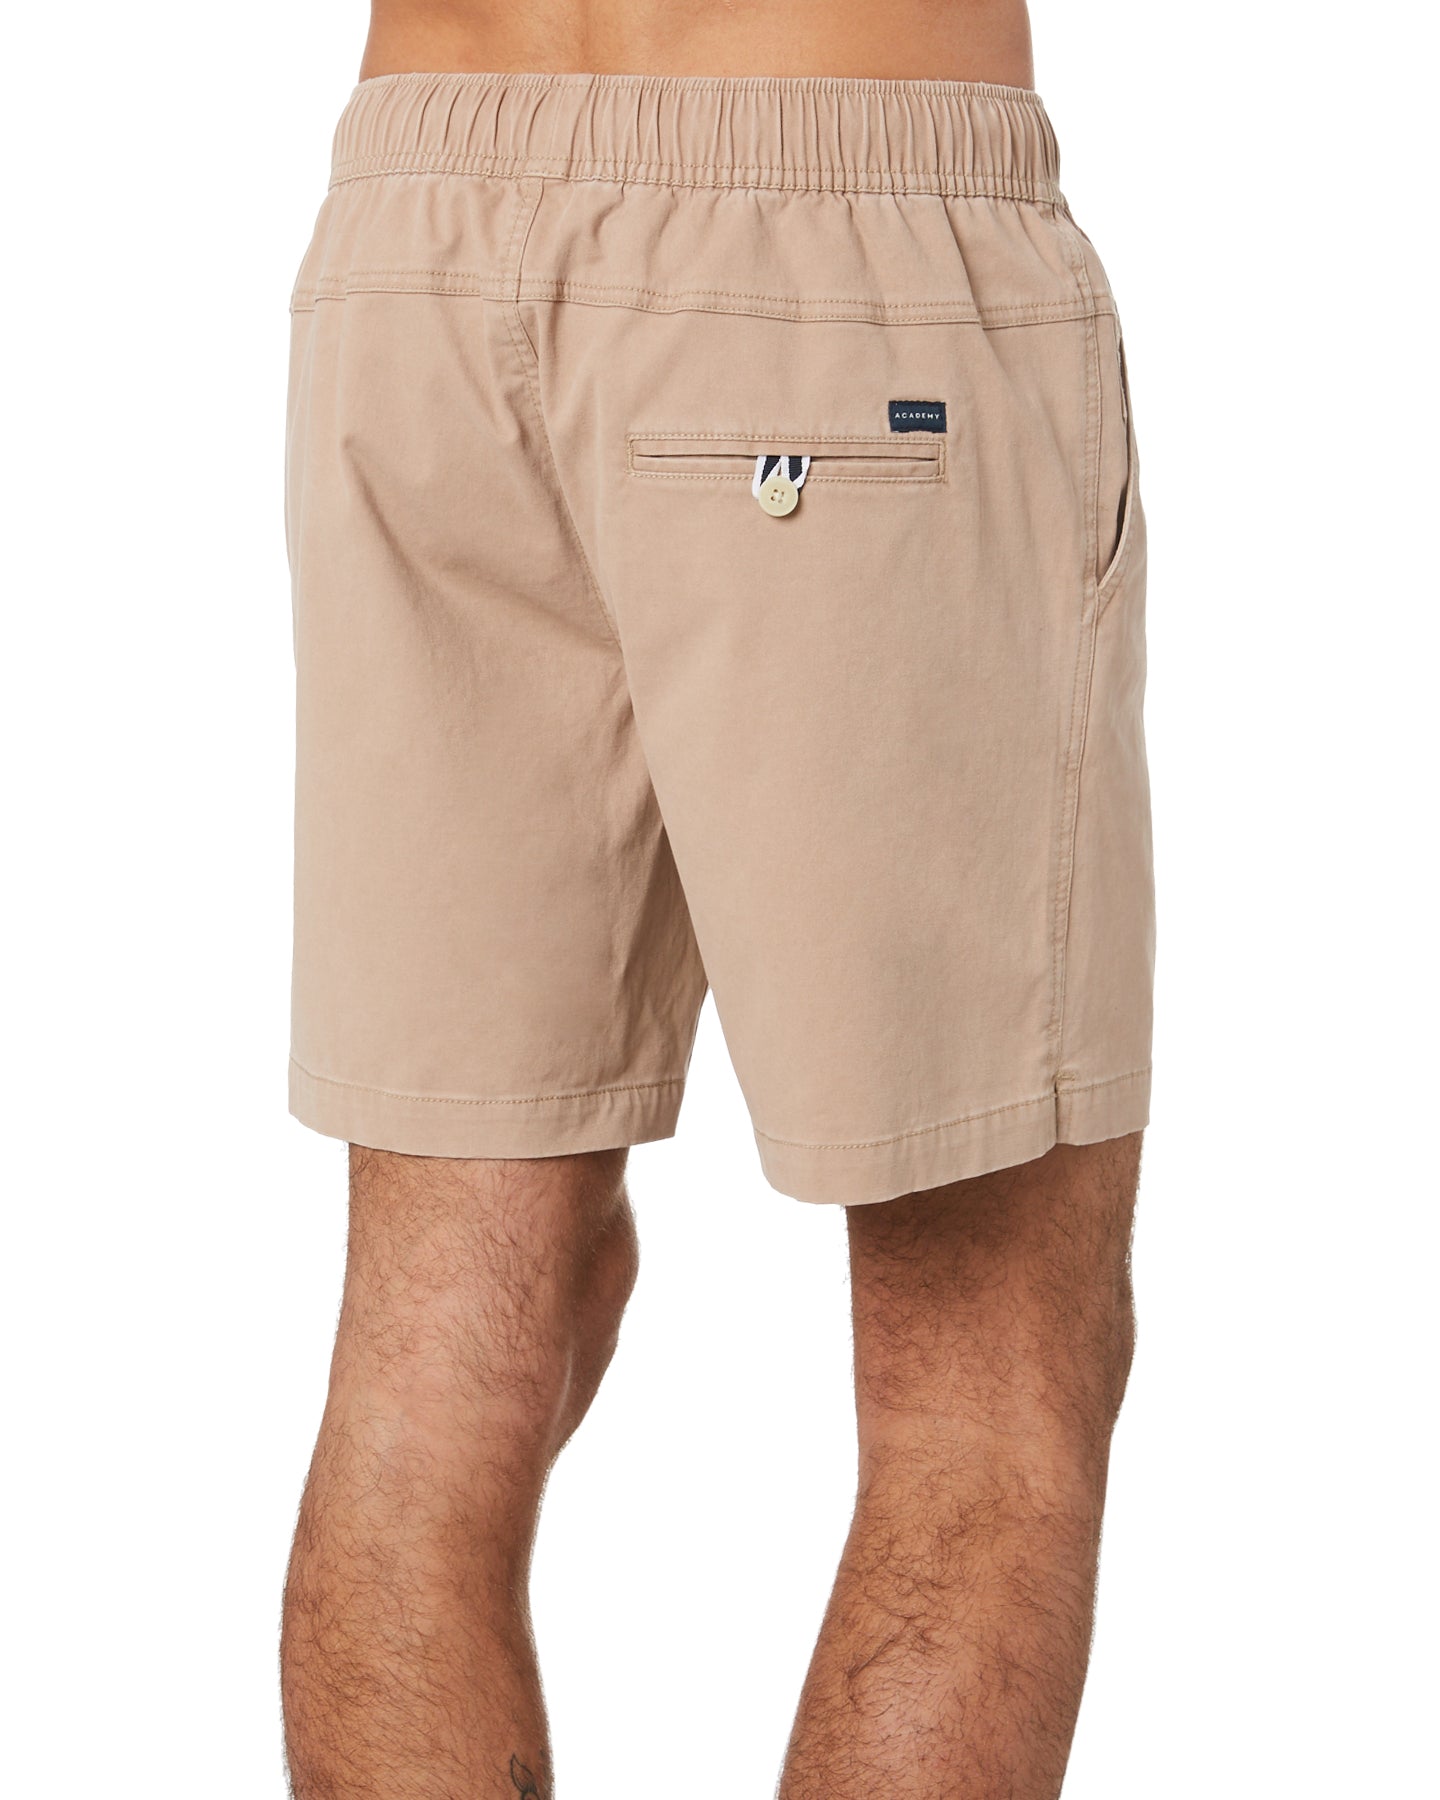 THE ACADEMY BRAND VOLLEY SHORT COFFEE